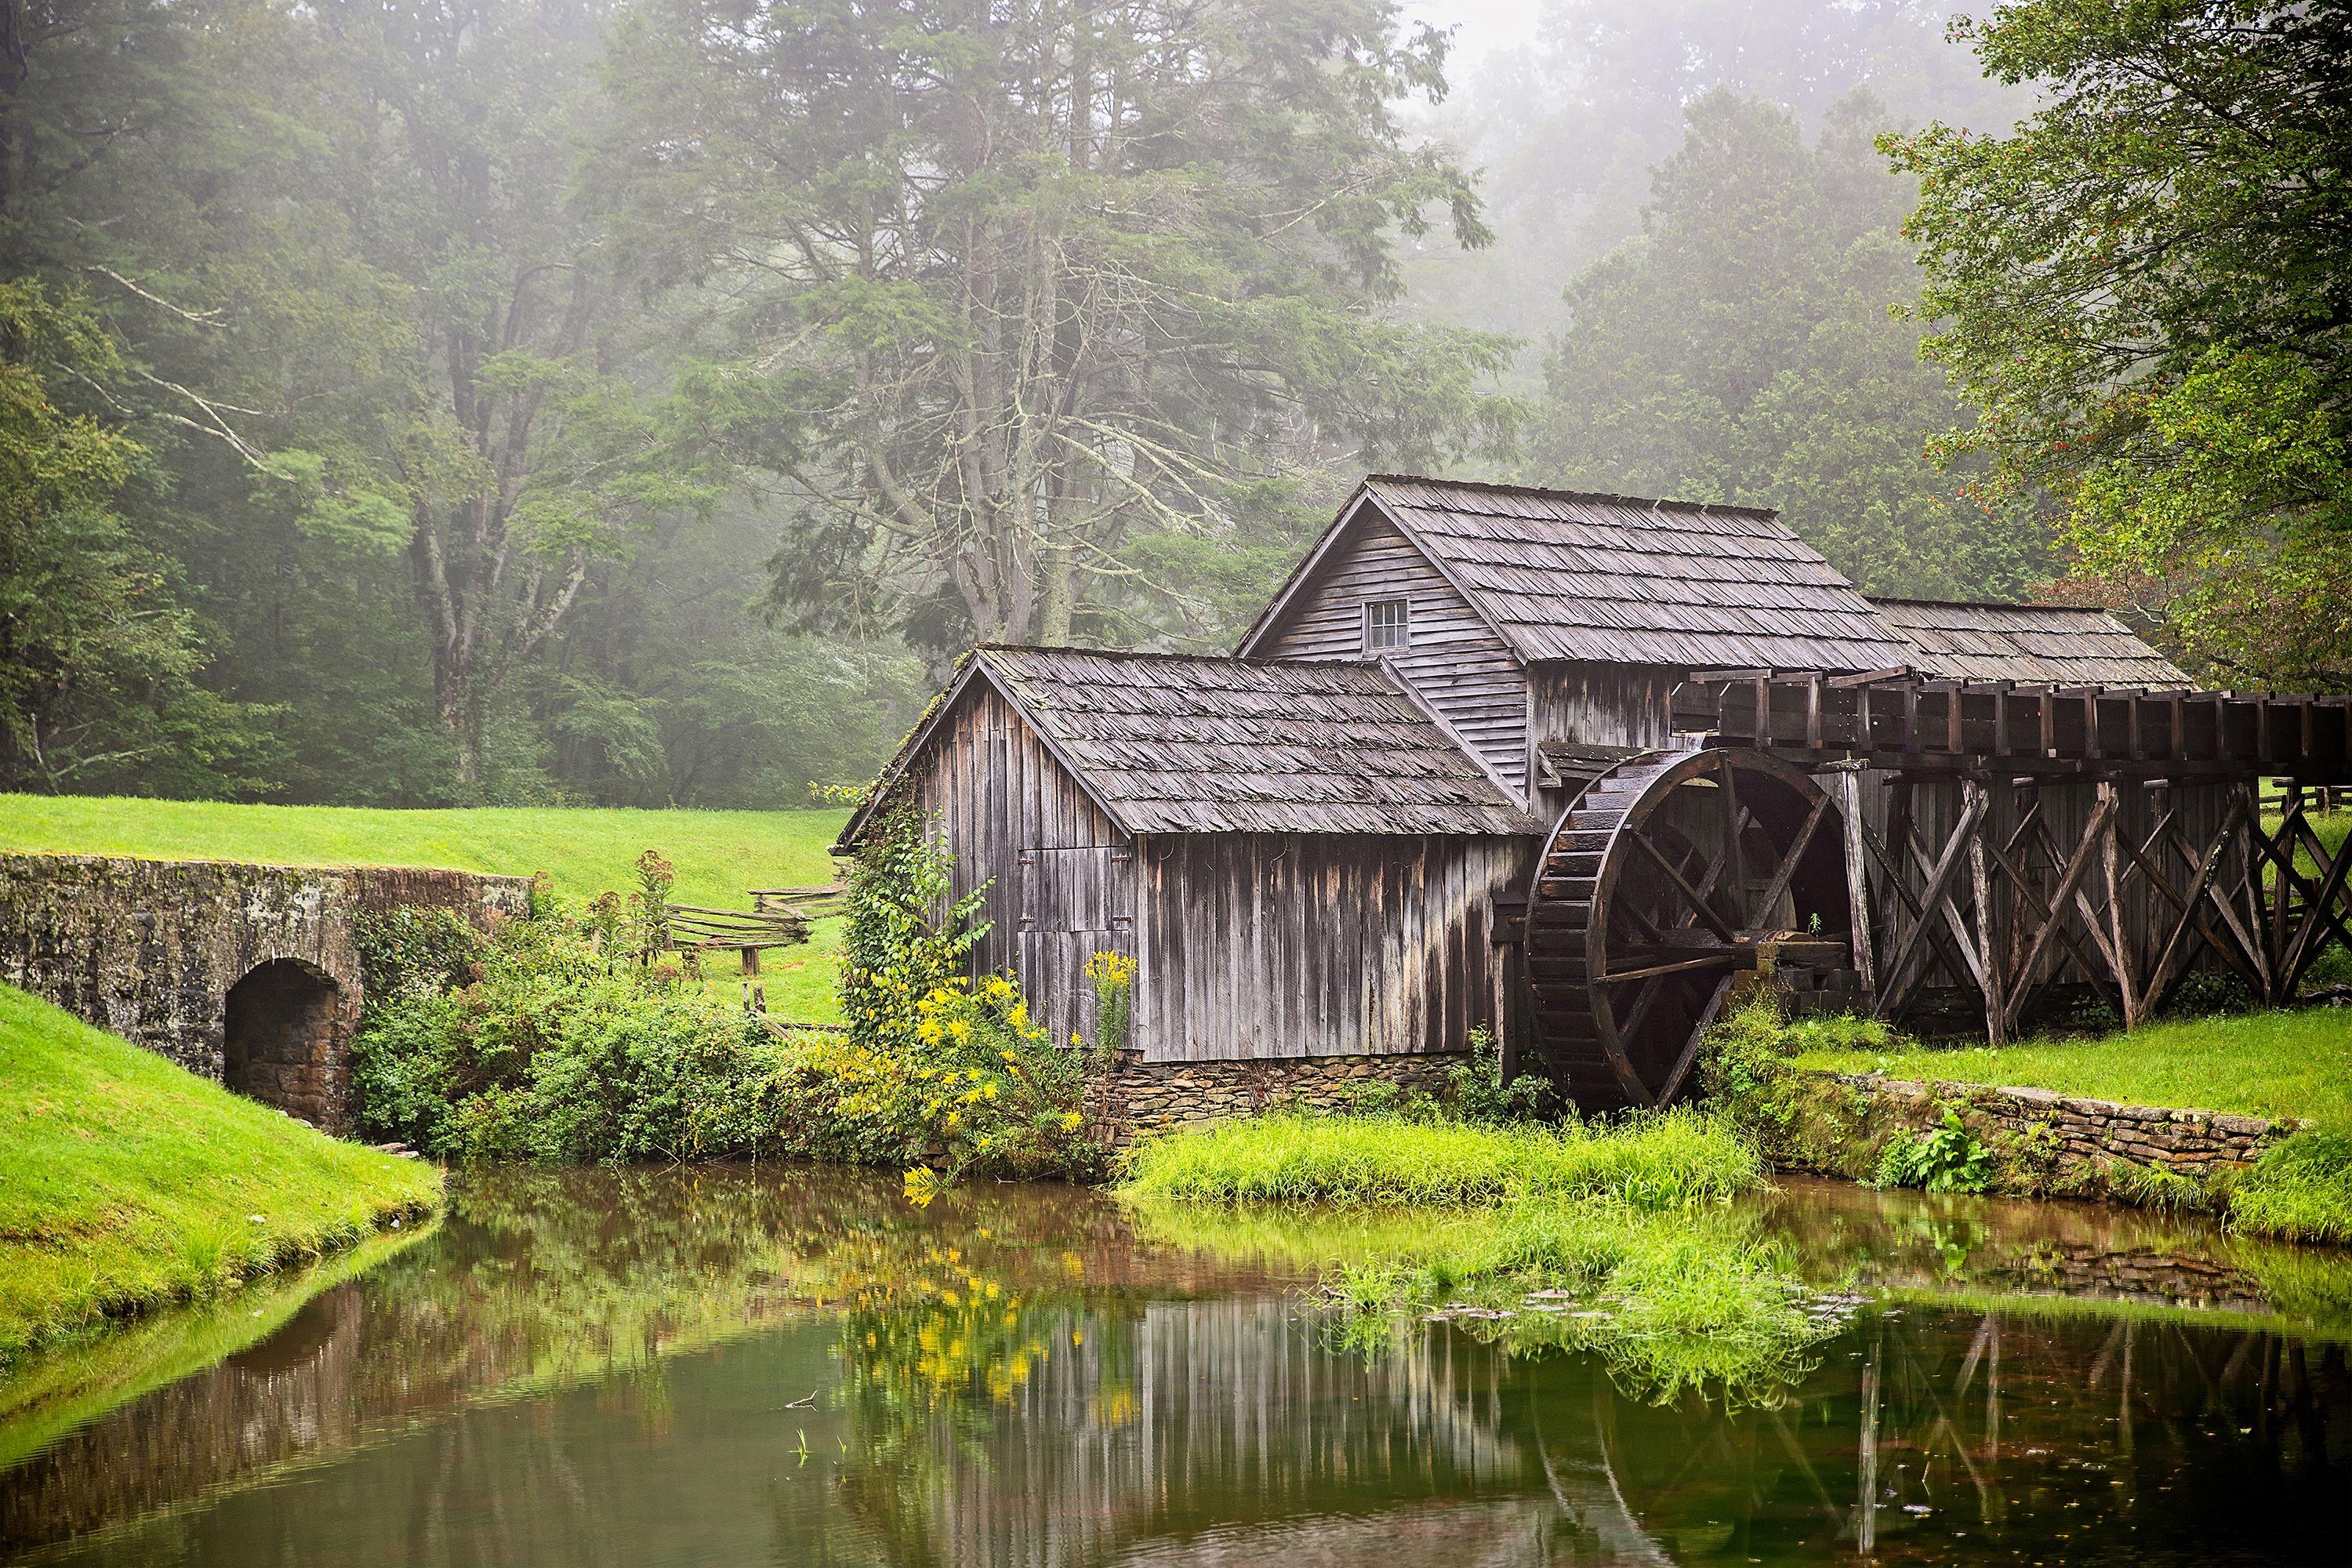 Daniel Ashe Color Photograph - Fog over Mabry Mill, Photograph, Archival Ink Jet